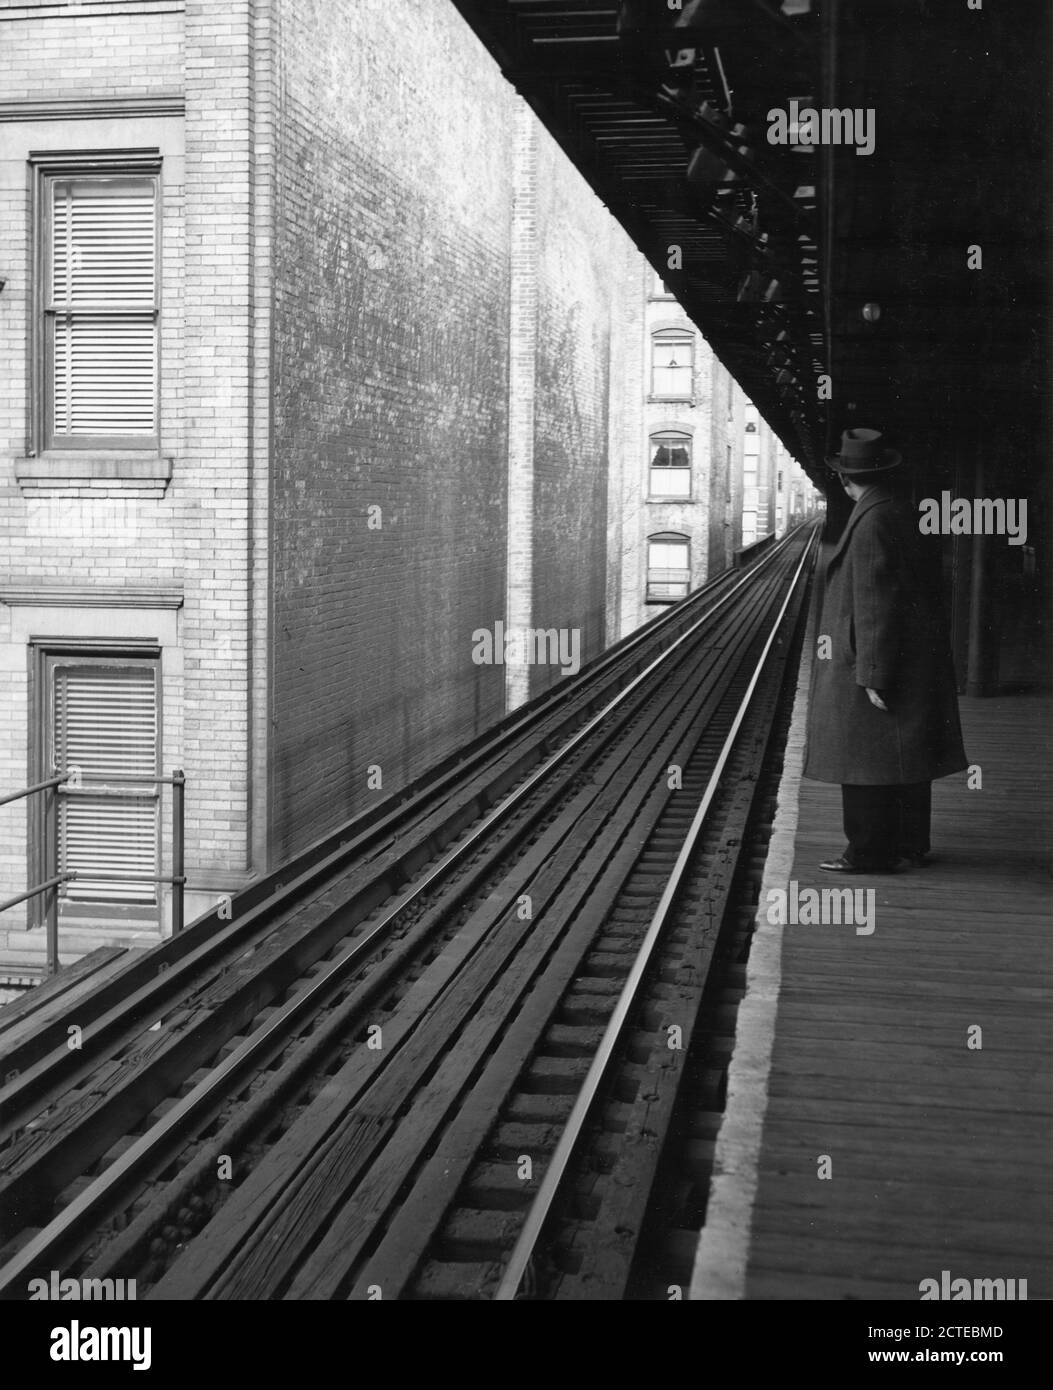 View of a lone passenger waiting on an elevated railway platform. At this Bronx location, the tracks tightly crowd tenement buildings as far as the eye can see, New York, NY, 1953. (Photo by United States Information Agency/RBM Vintage Images) Stock Photo